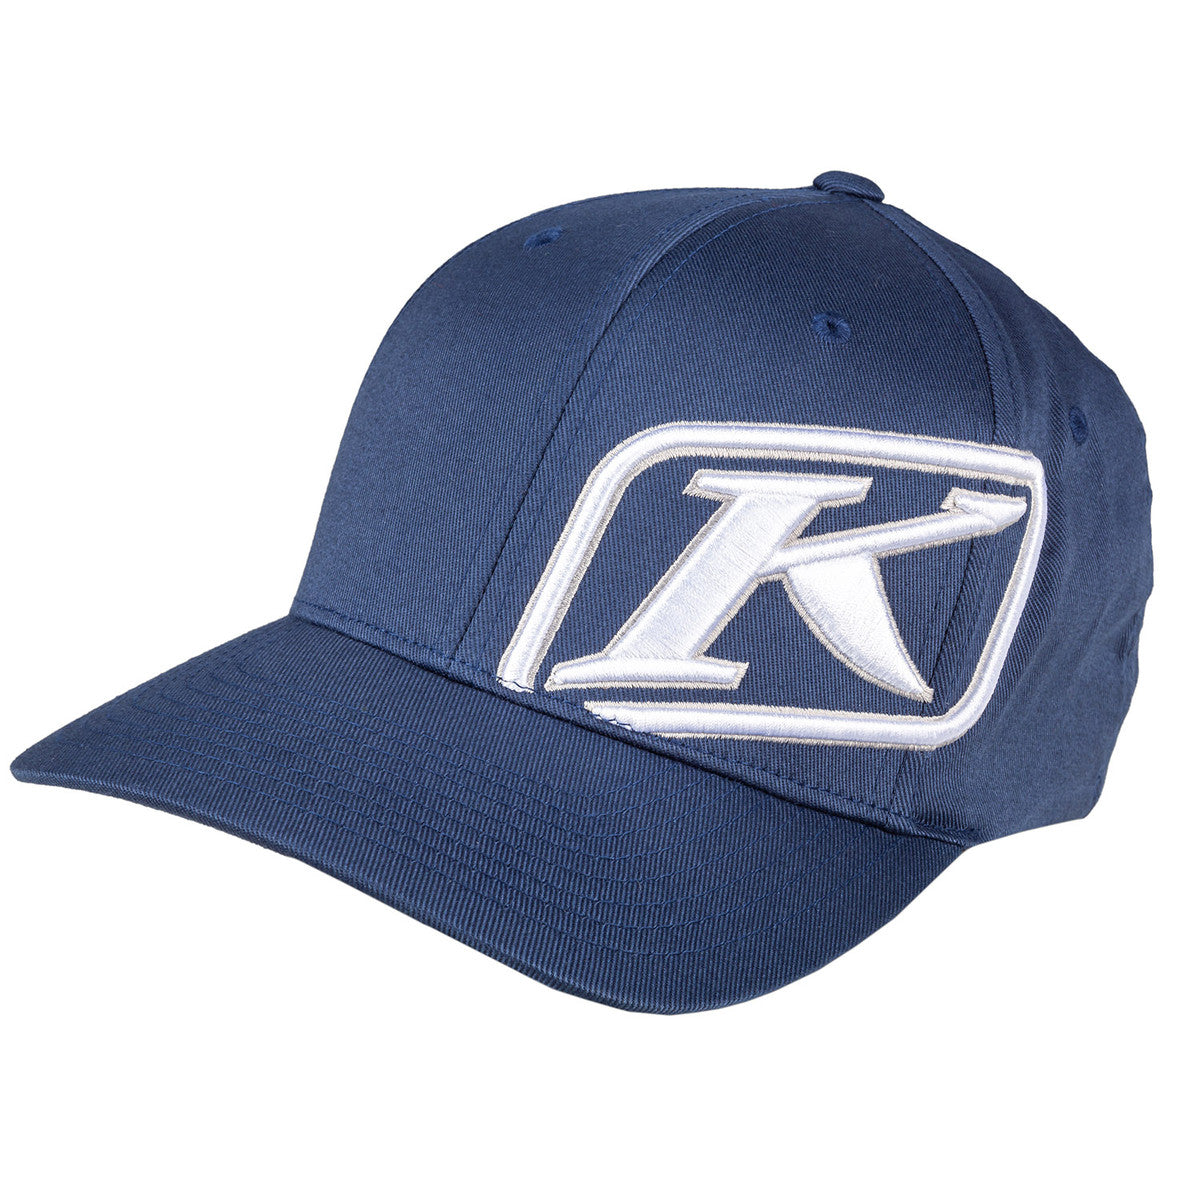 Ride in style with the Klim Rider Hat. This Flexfit cap features an embroidered Klim logo.